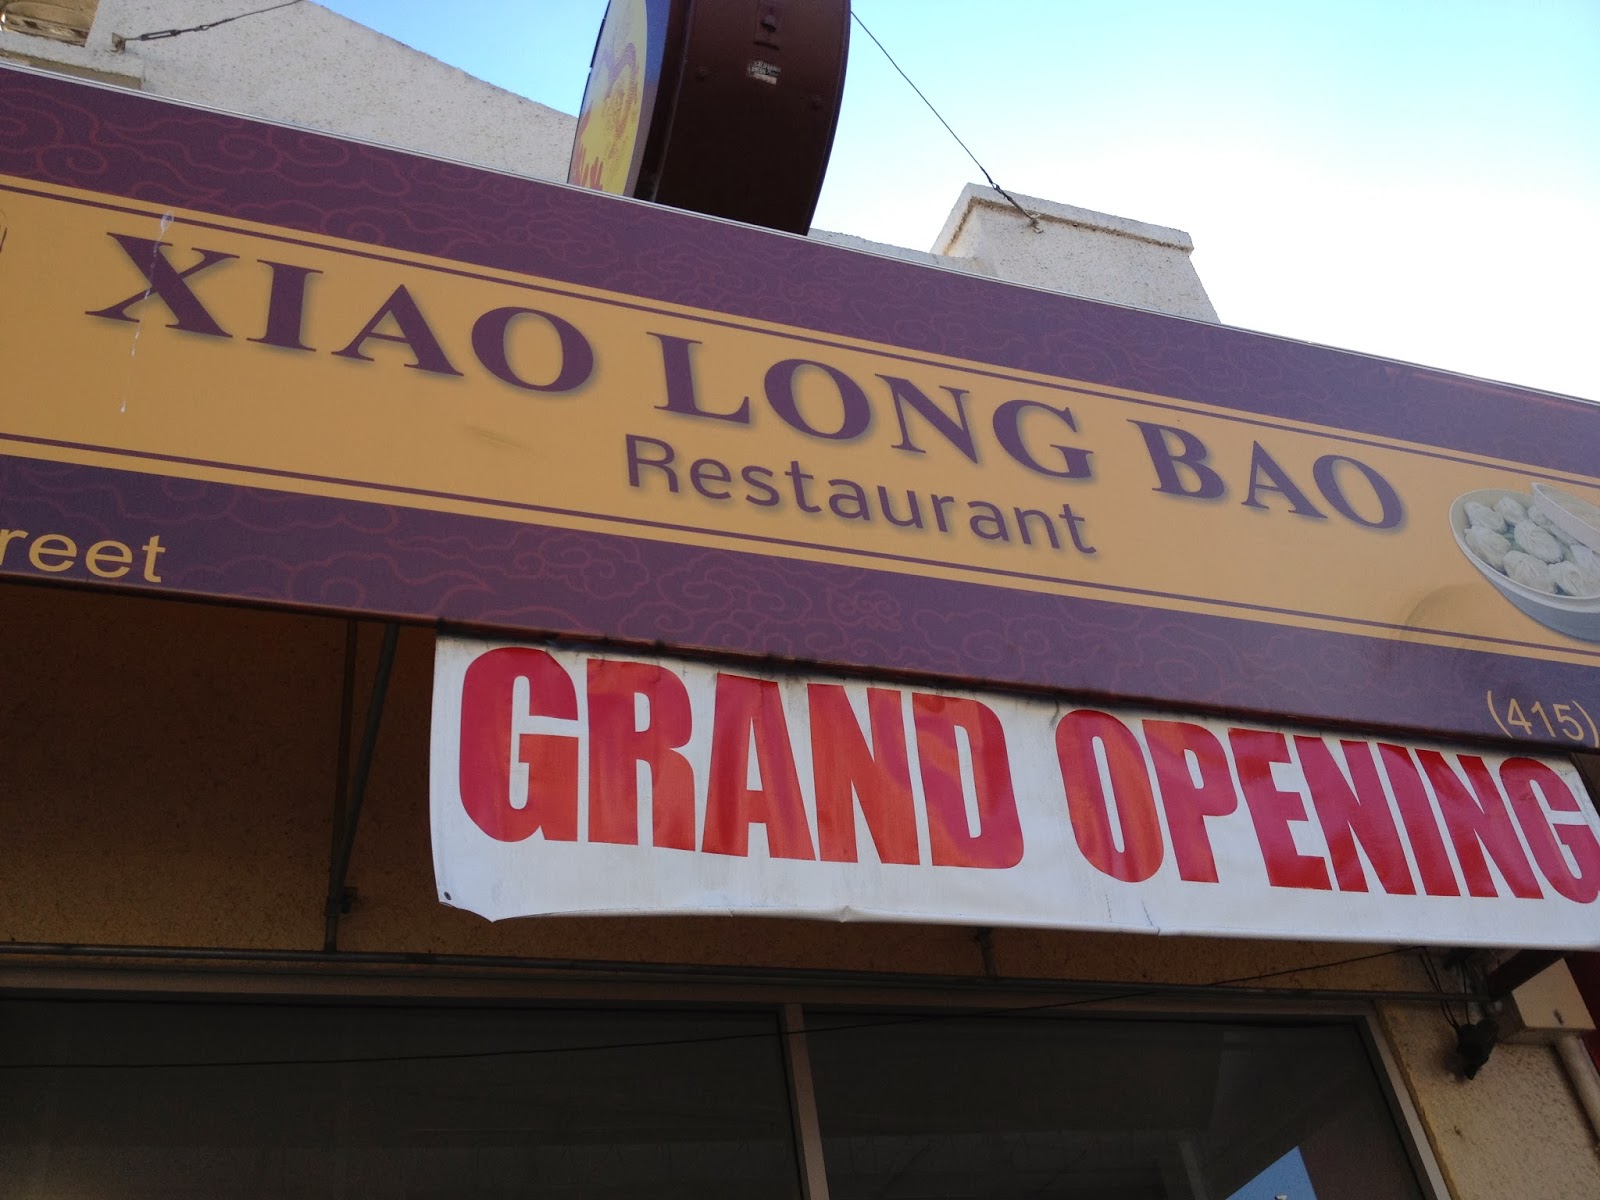 ABC Dining, Letter X: Xiao Long Bao Restaurant | Chow Down USA